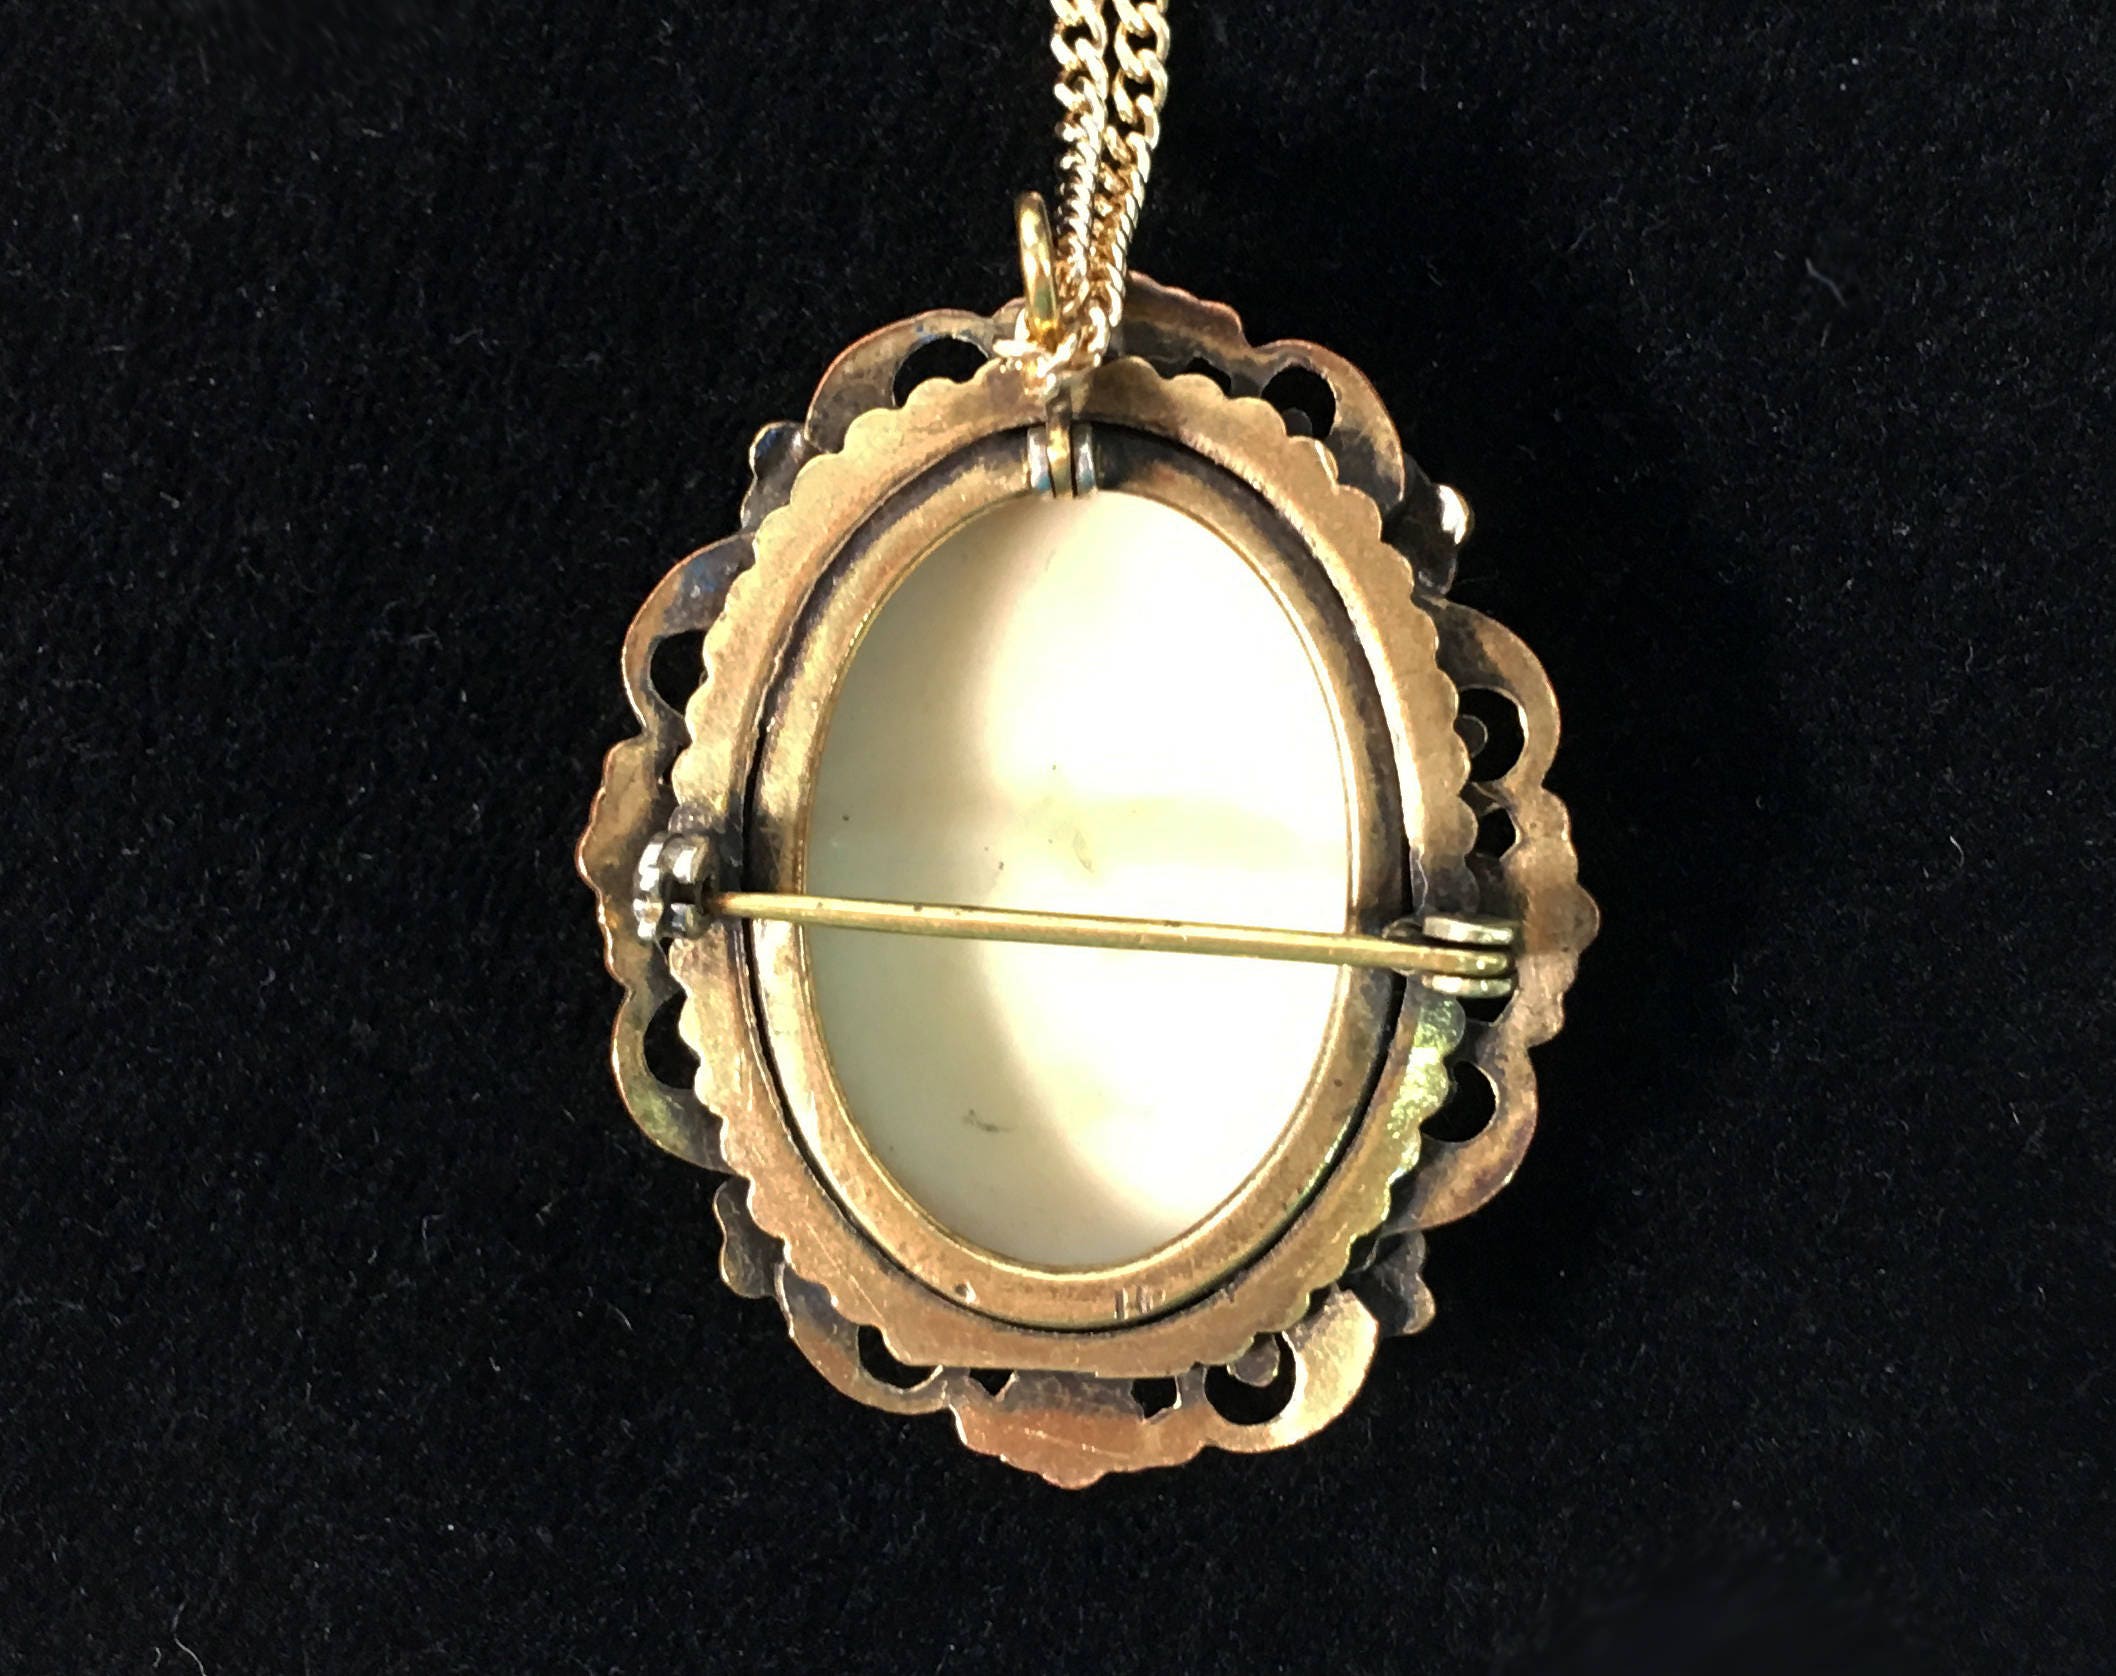 Vintage Cameo Pendant on 14K Gold Filled Chain - Large Oval Retro Cameo ...